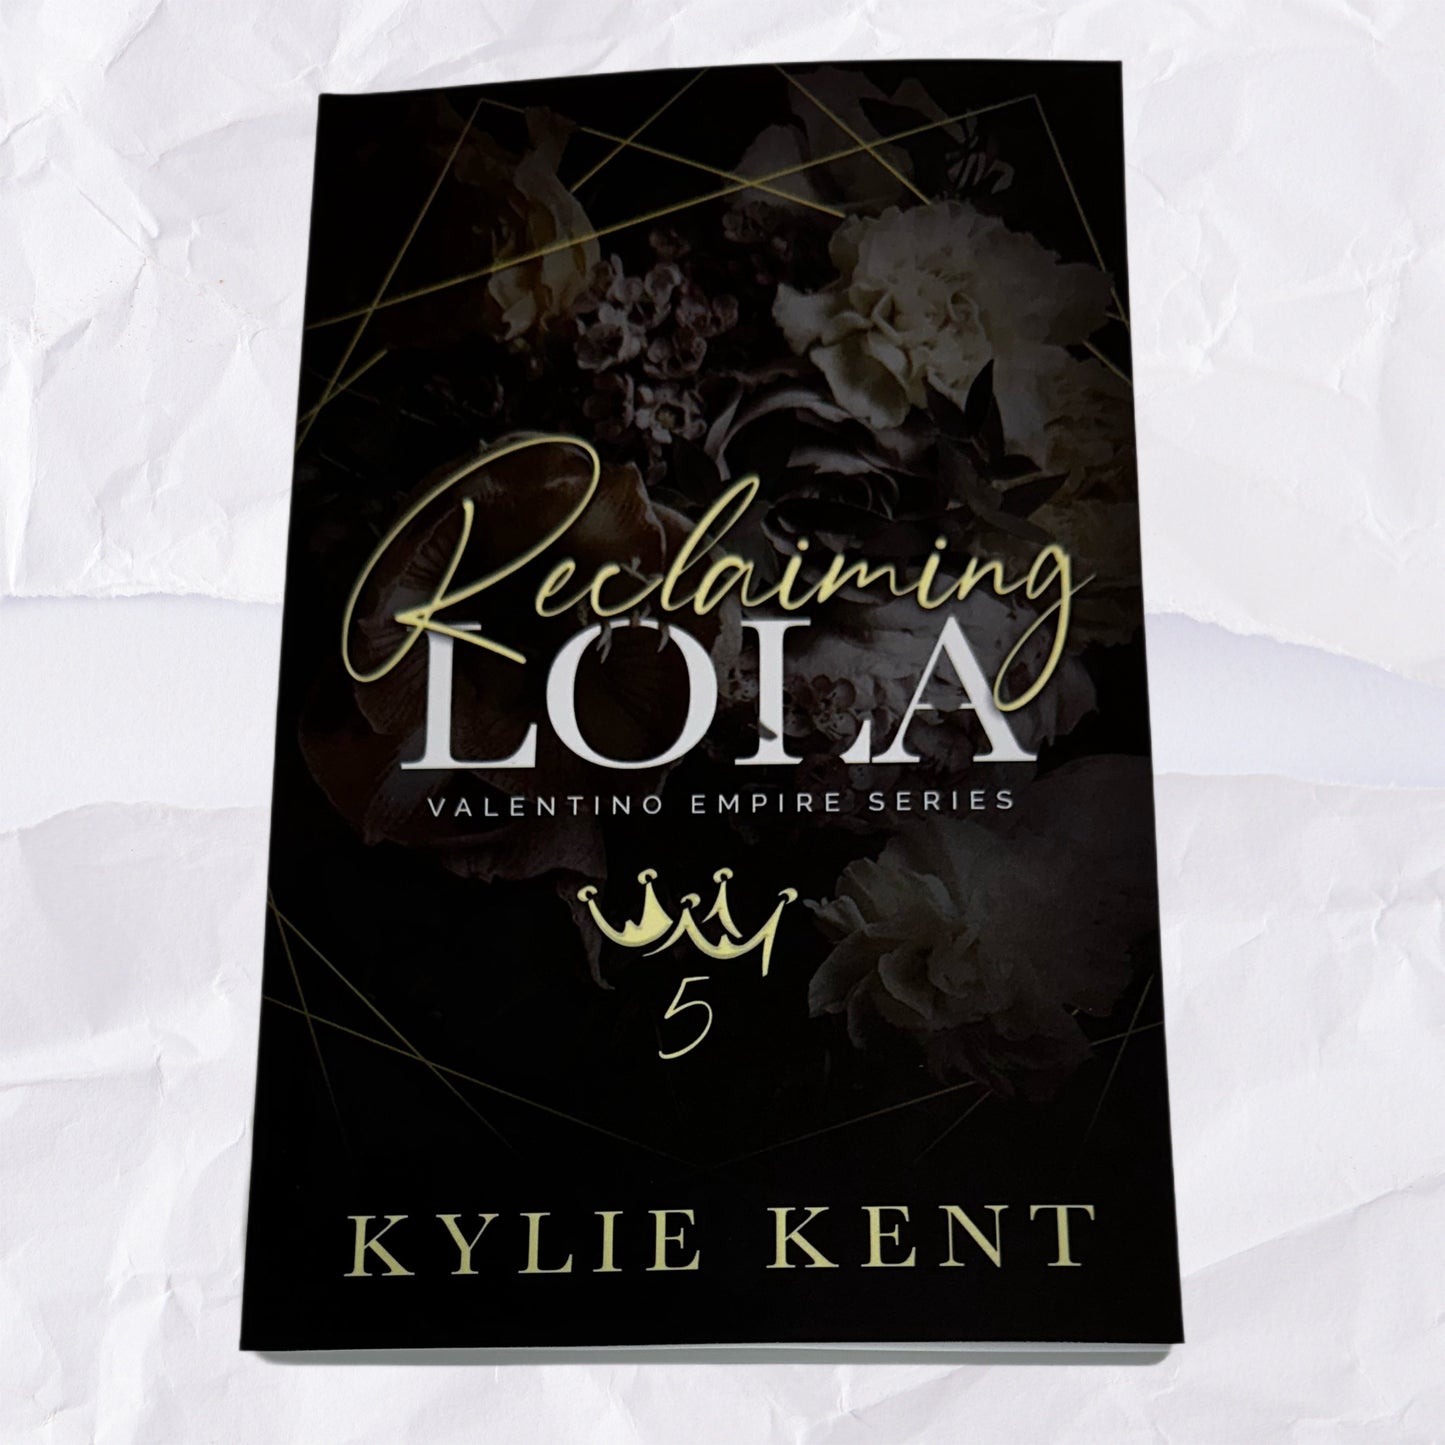 Reclaiming Lola (Valentino Empire #5) by Kylie Kent